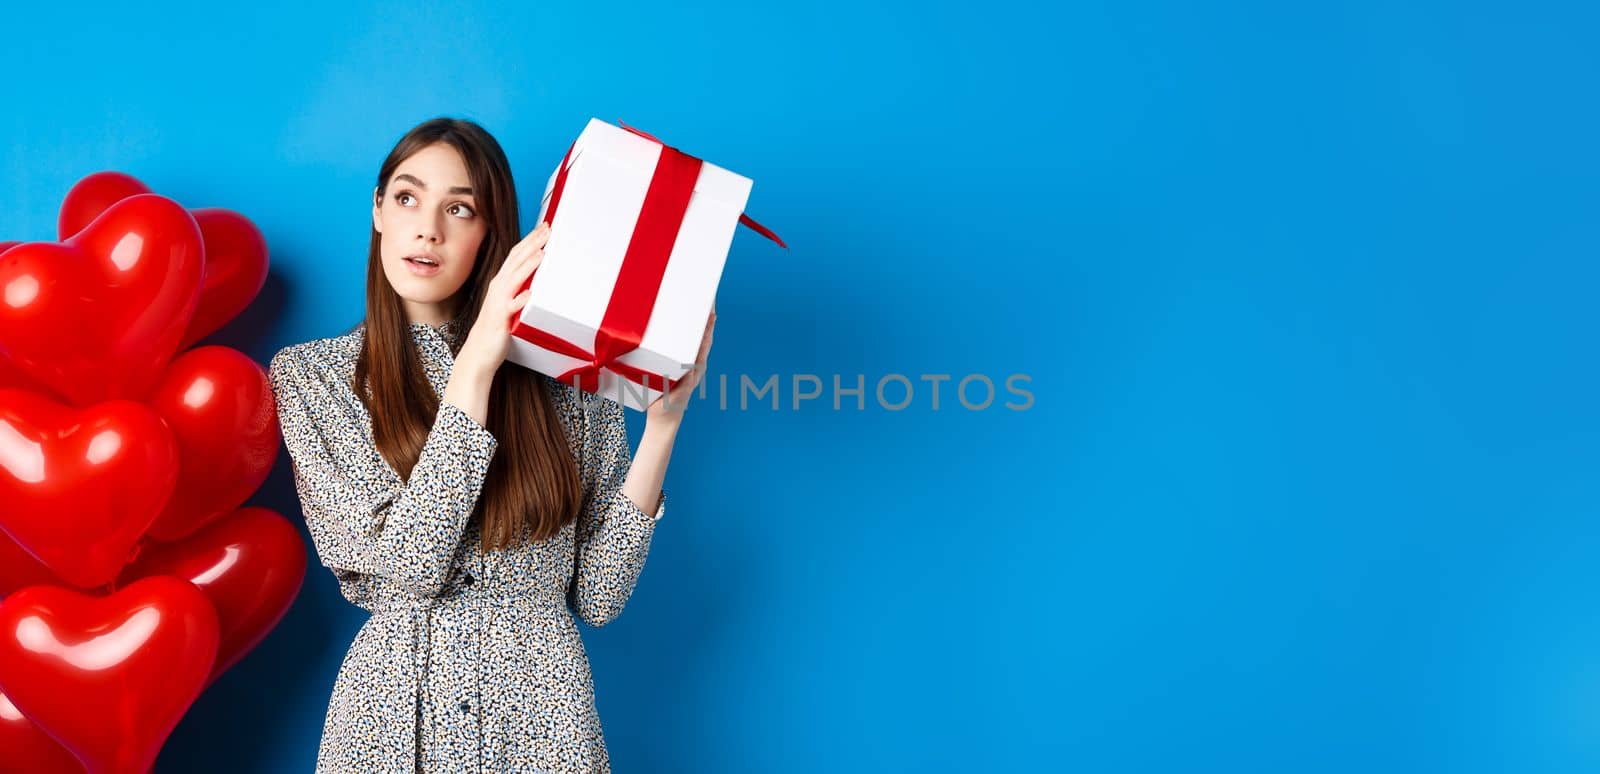 Valentines day. Beautiful woman shaking gift box to guess what inside, look dreamy, celebrating lovers holiday, standing near red hearts, blue background by Benzoix